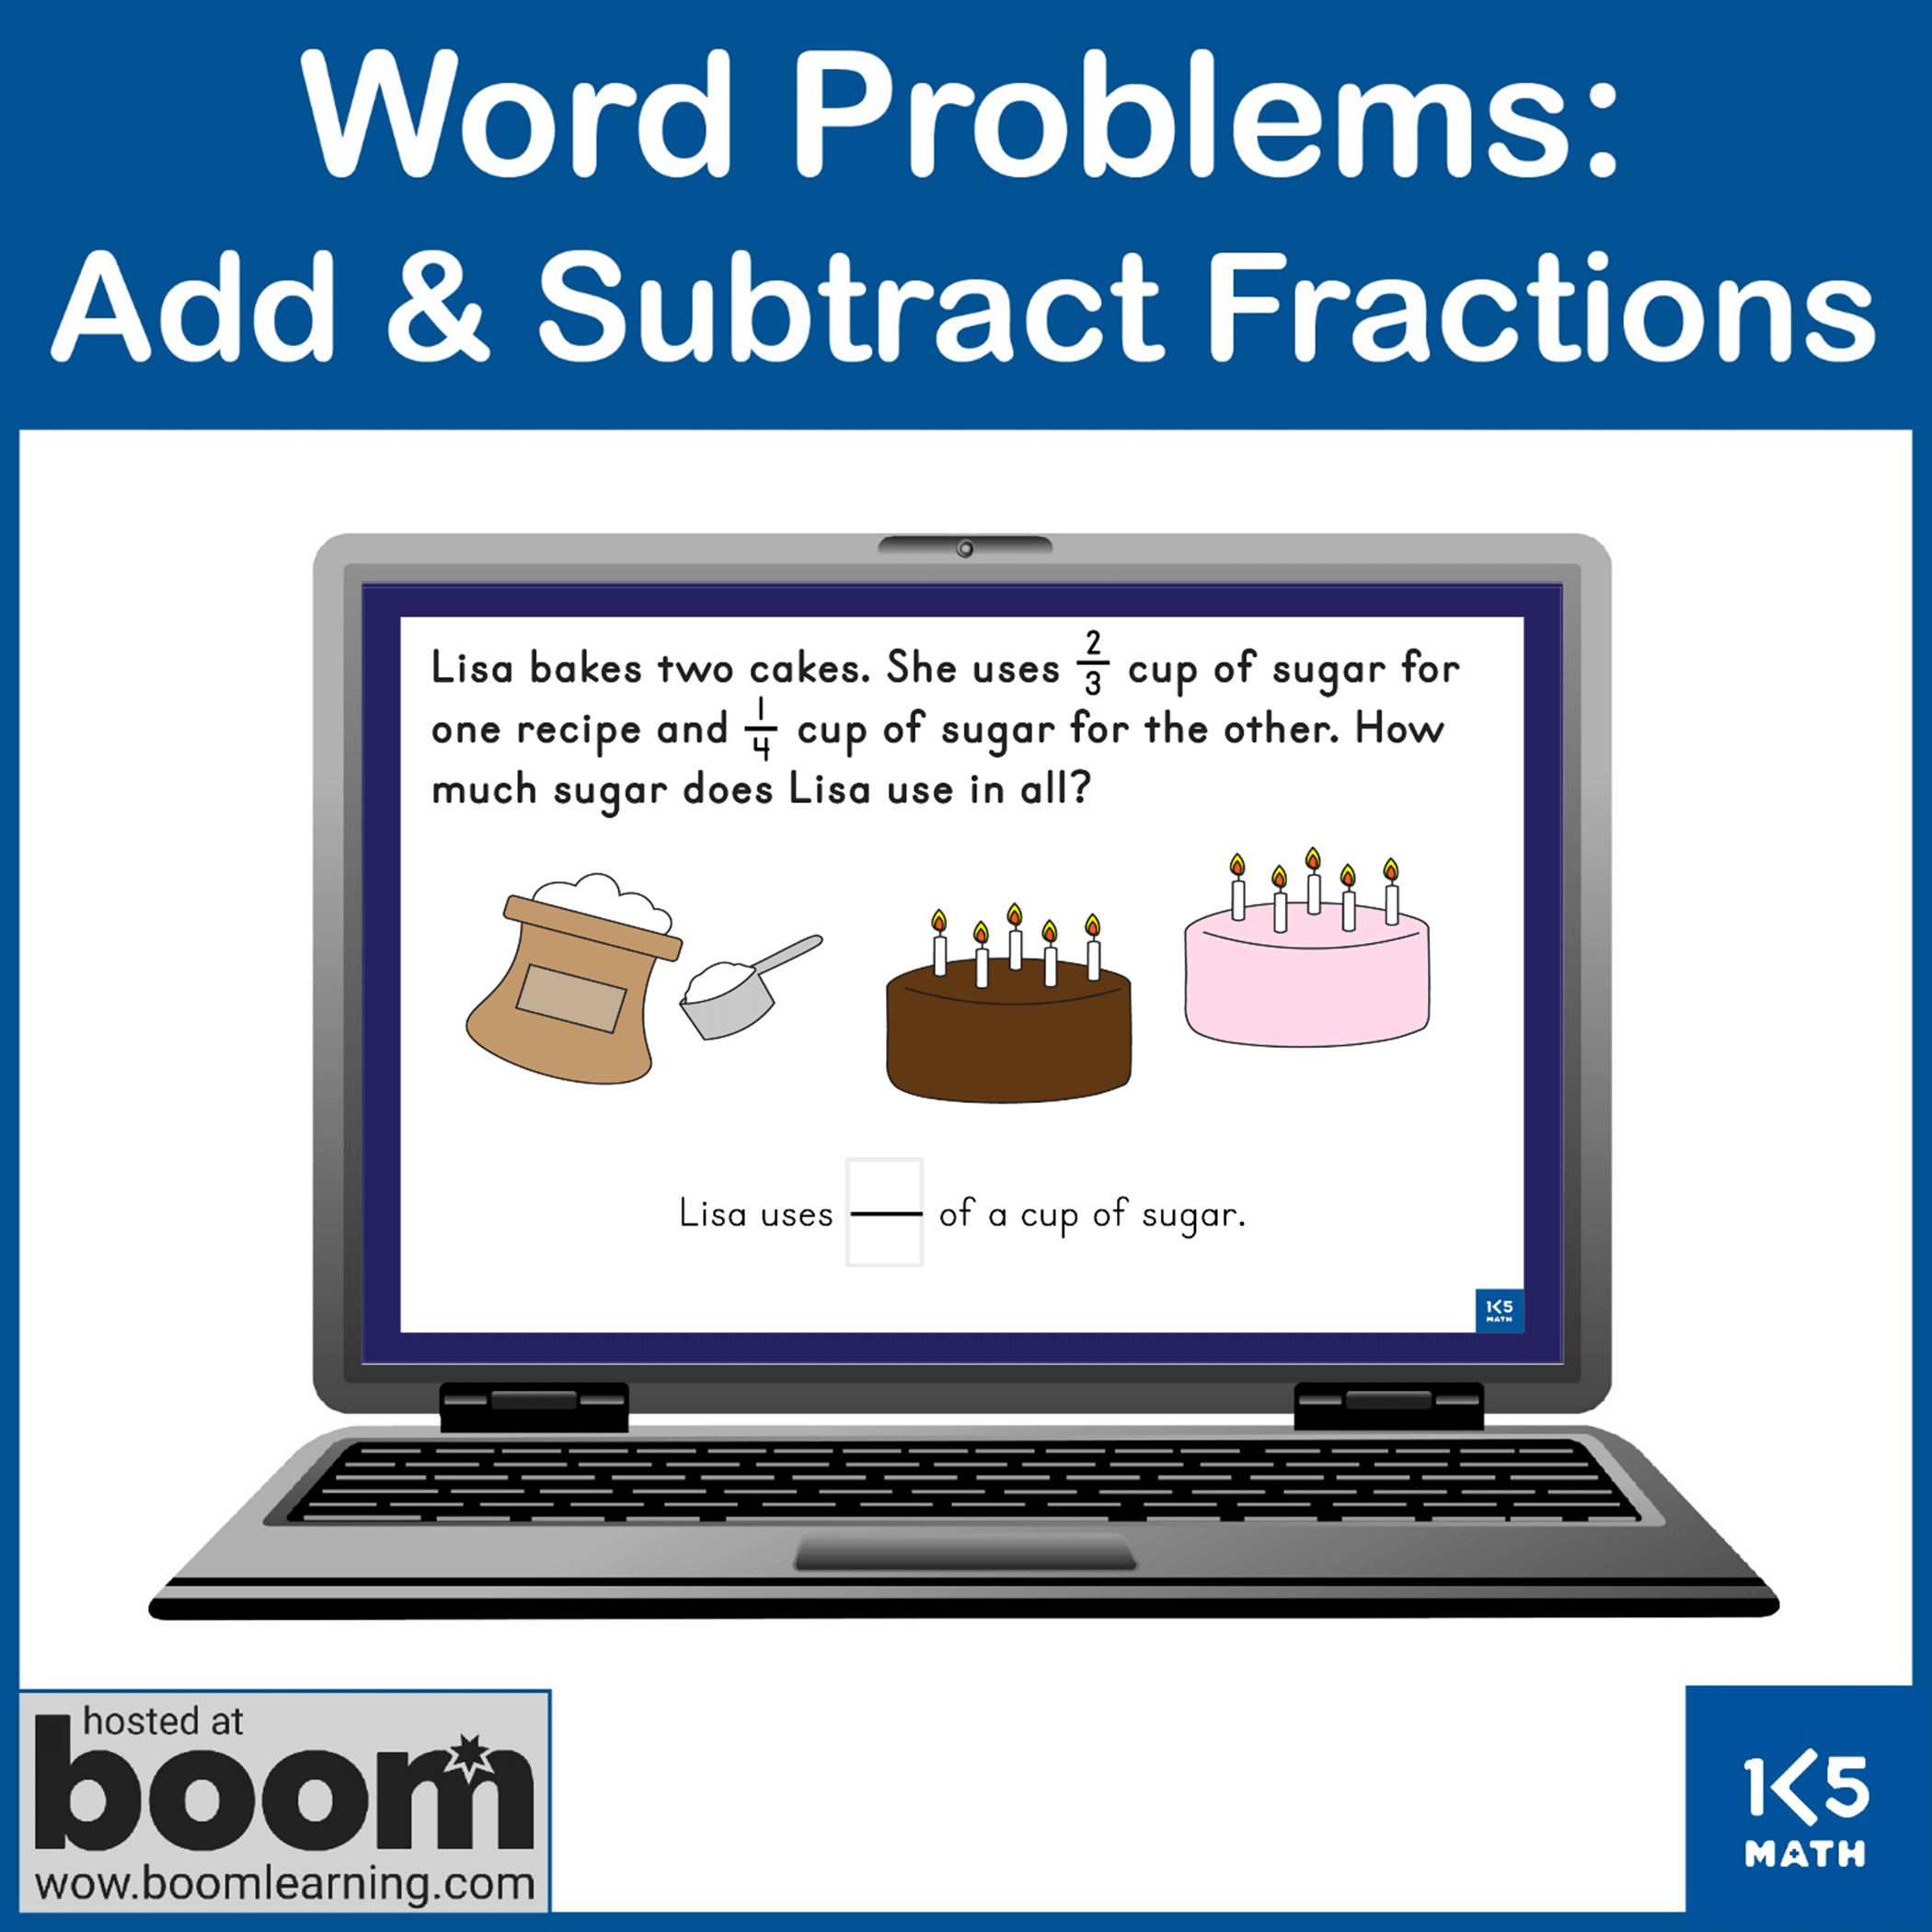 Boom Cards: Add & Subtract Fractions